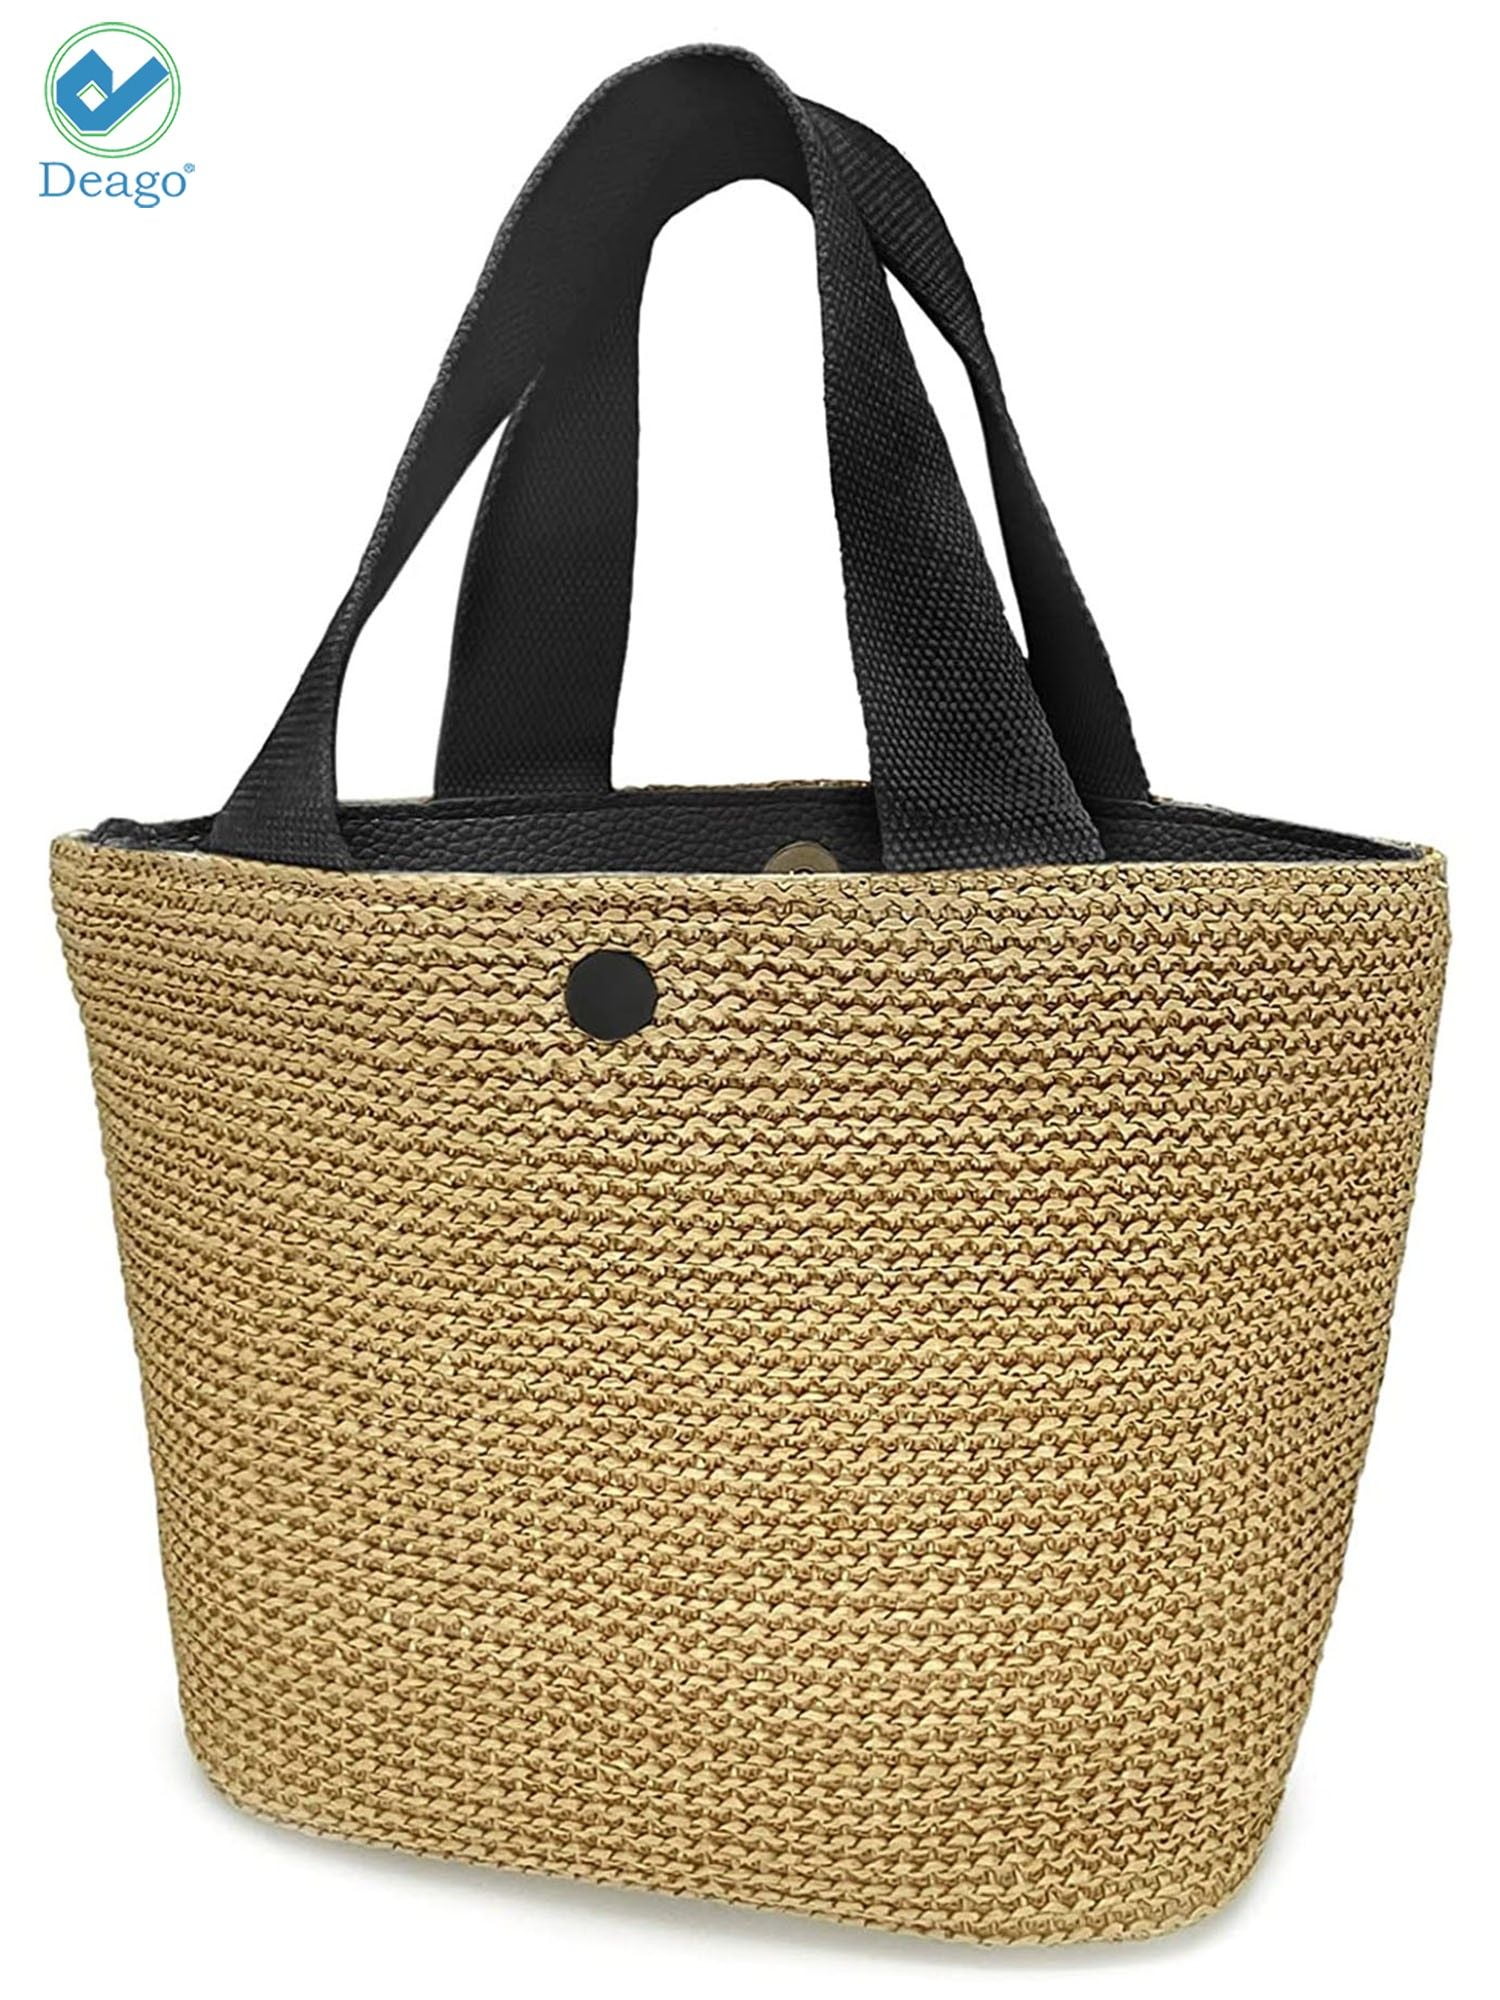 Deep coffee color Straw Tote Bag Women Hand Woven Large Casual Handbags Hobo Straw Beach Bag with Lining Pockets for Daily Use Beach Travel 